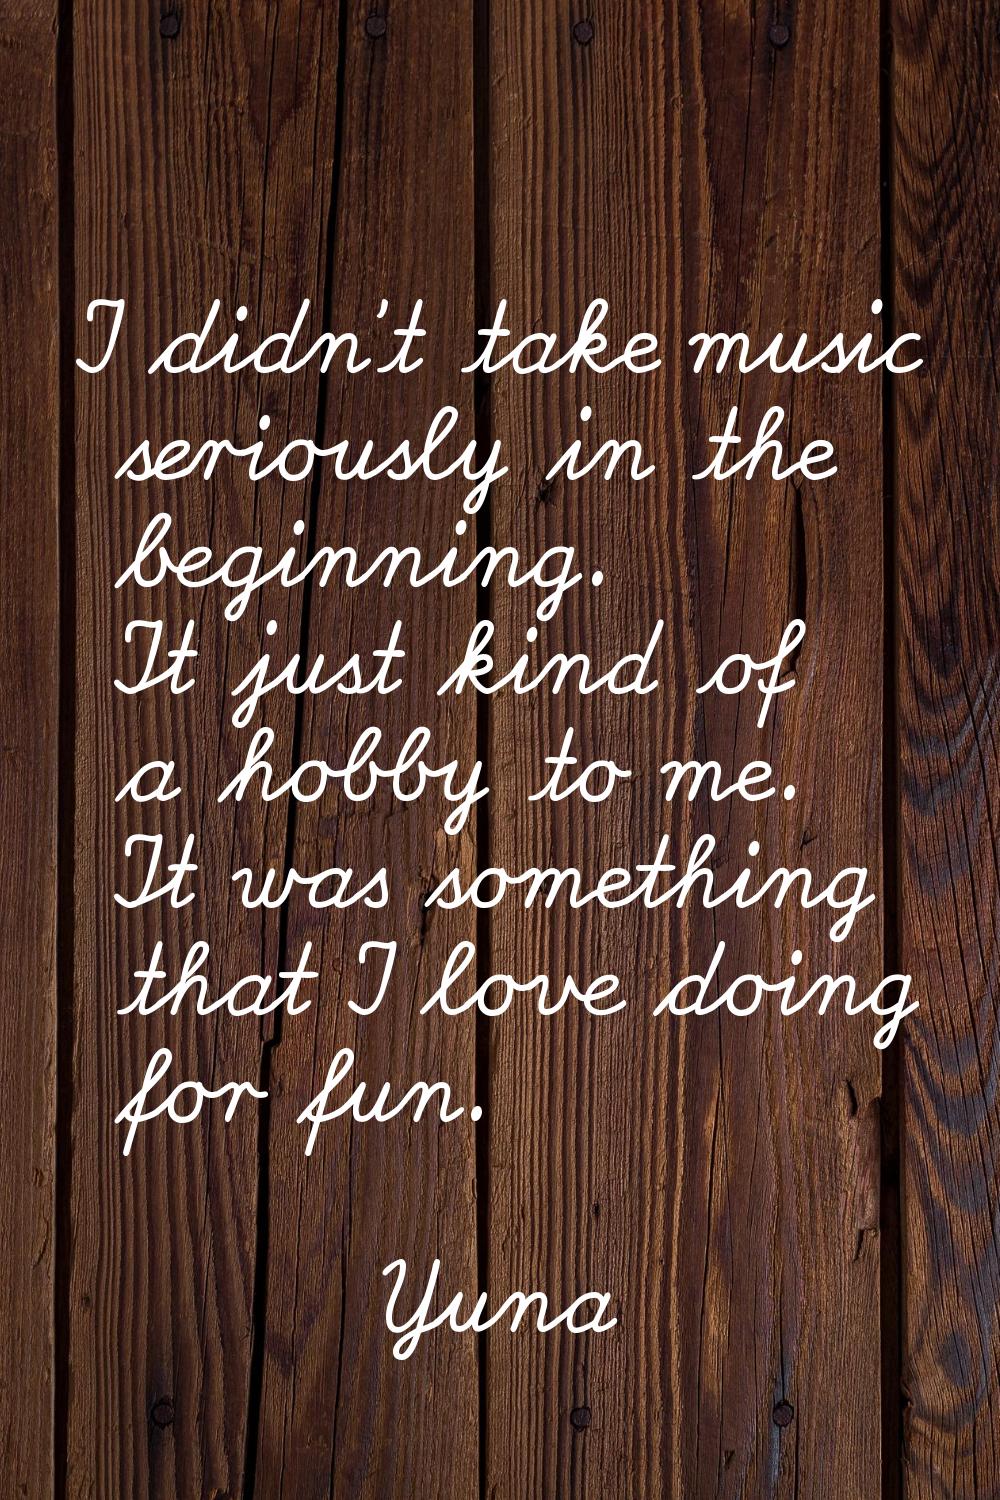 I didn't take music seriously in the beginning. It just kind of a hobby to me. It was something tha